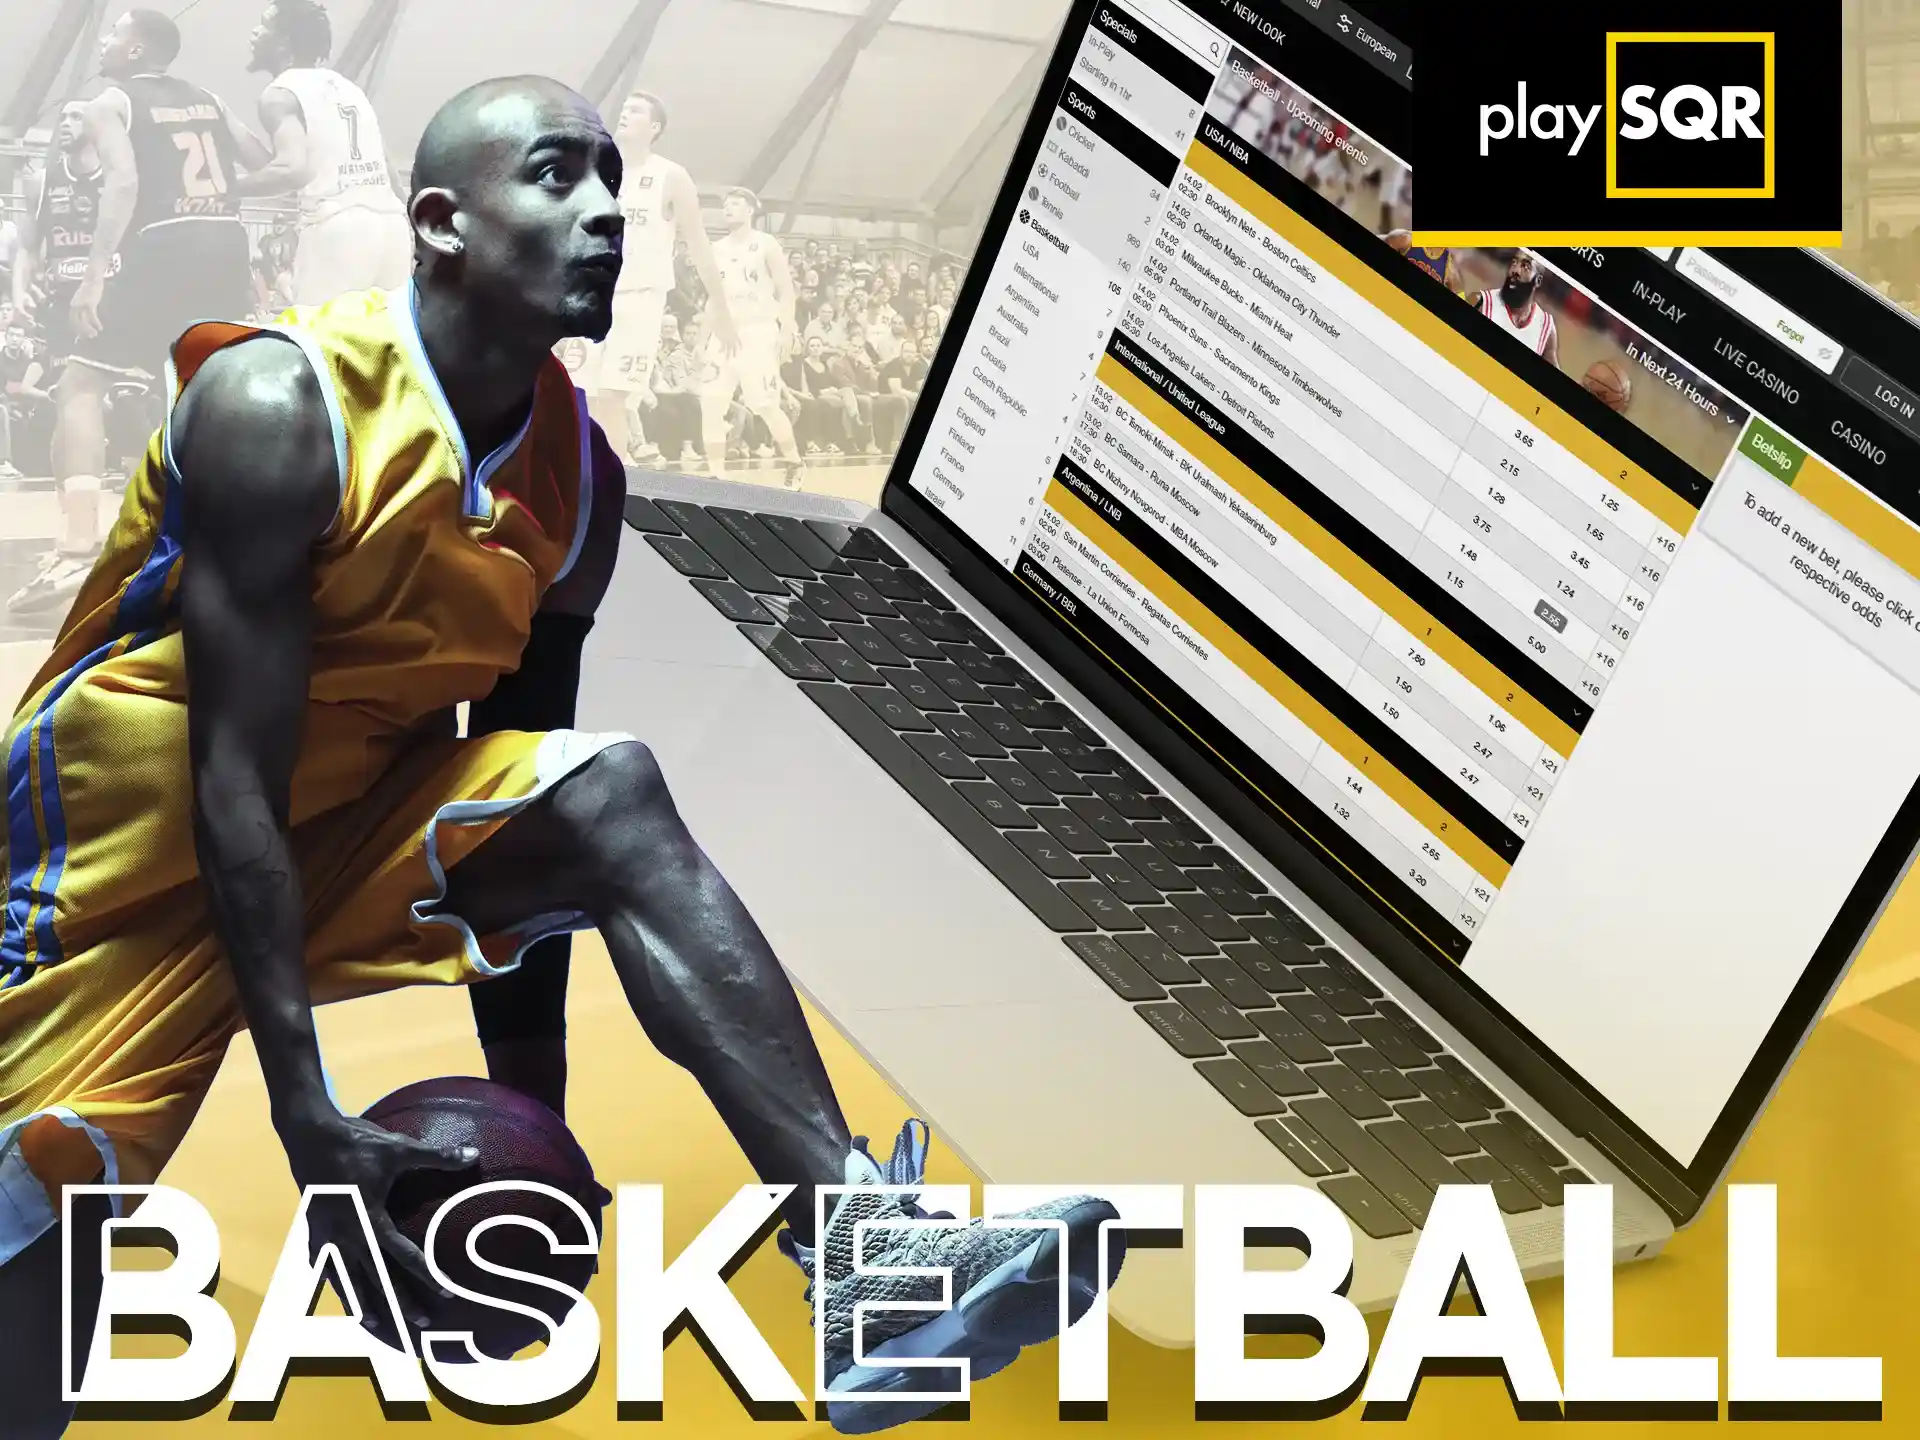 Bet on popular basketball events with PlaySQR.